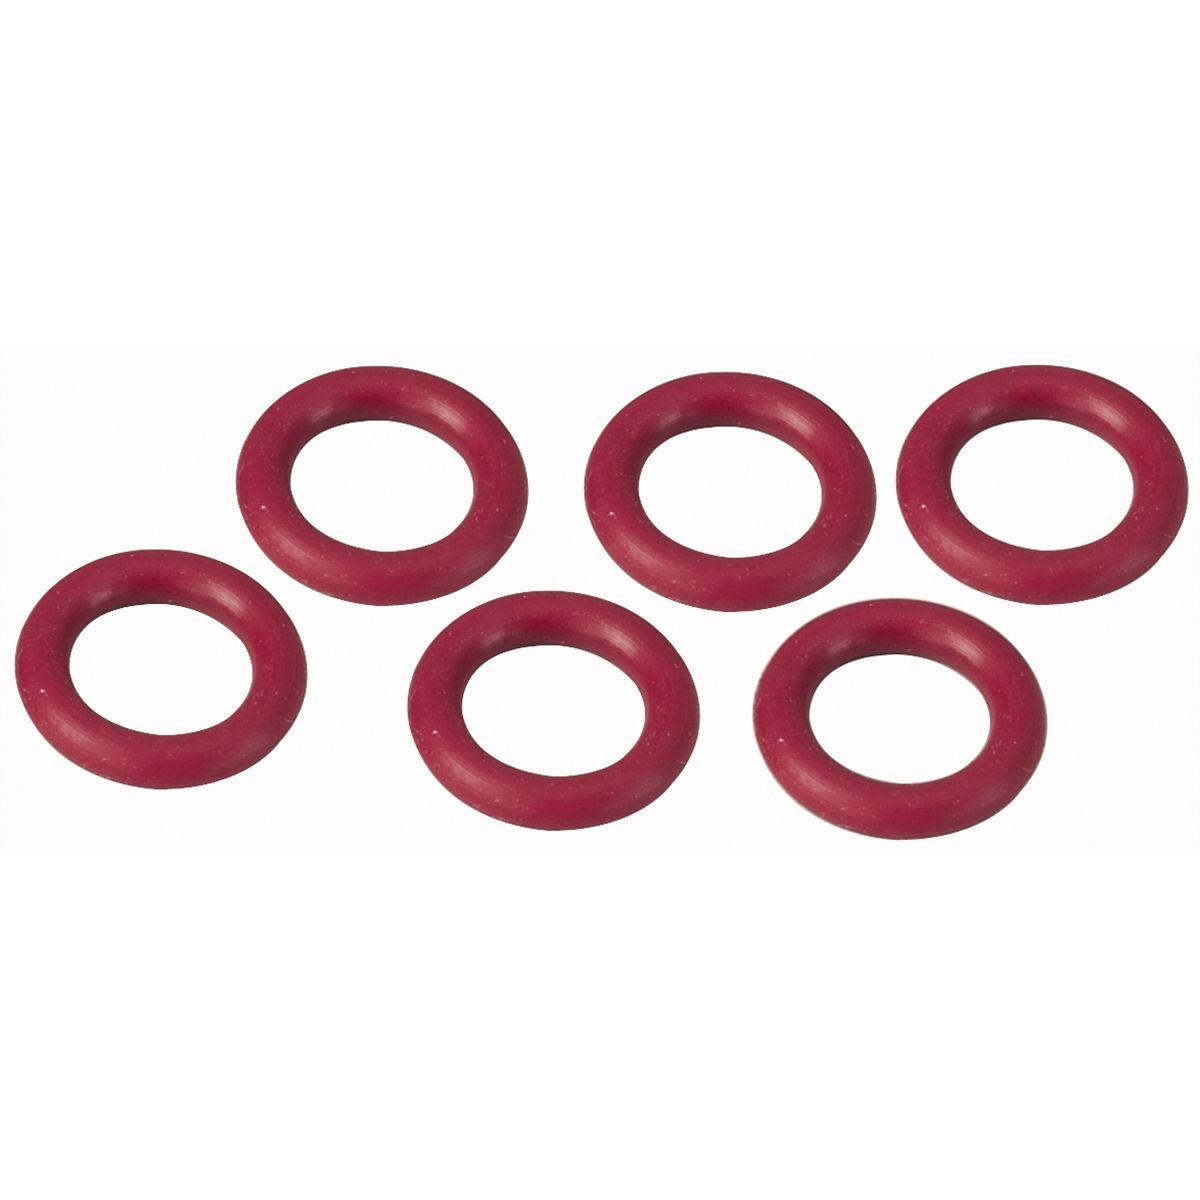 Ready Stock] 50pcs Outer Diameter OD 7mm-30mm Thickness CS 2.4mm Red Seal O  rings Gasket Ring Washer Durable VMQ Silicone Rubber Sealing O-ring  Replacement | Lazada PH